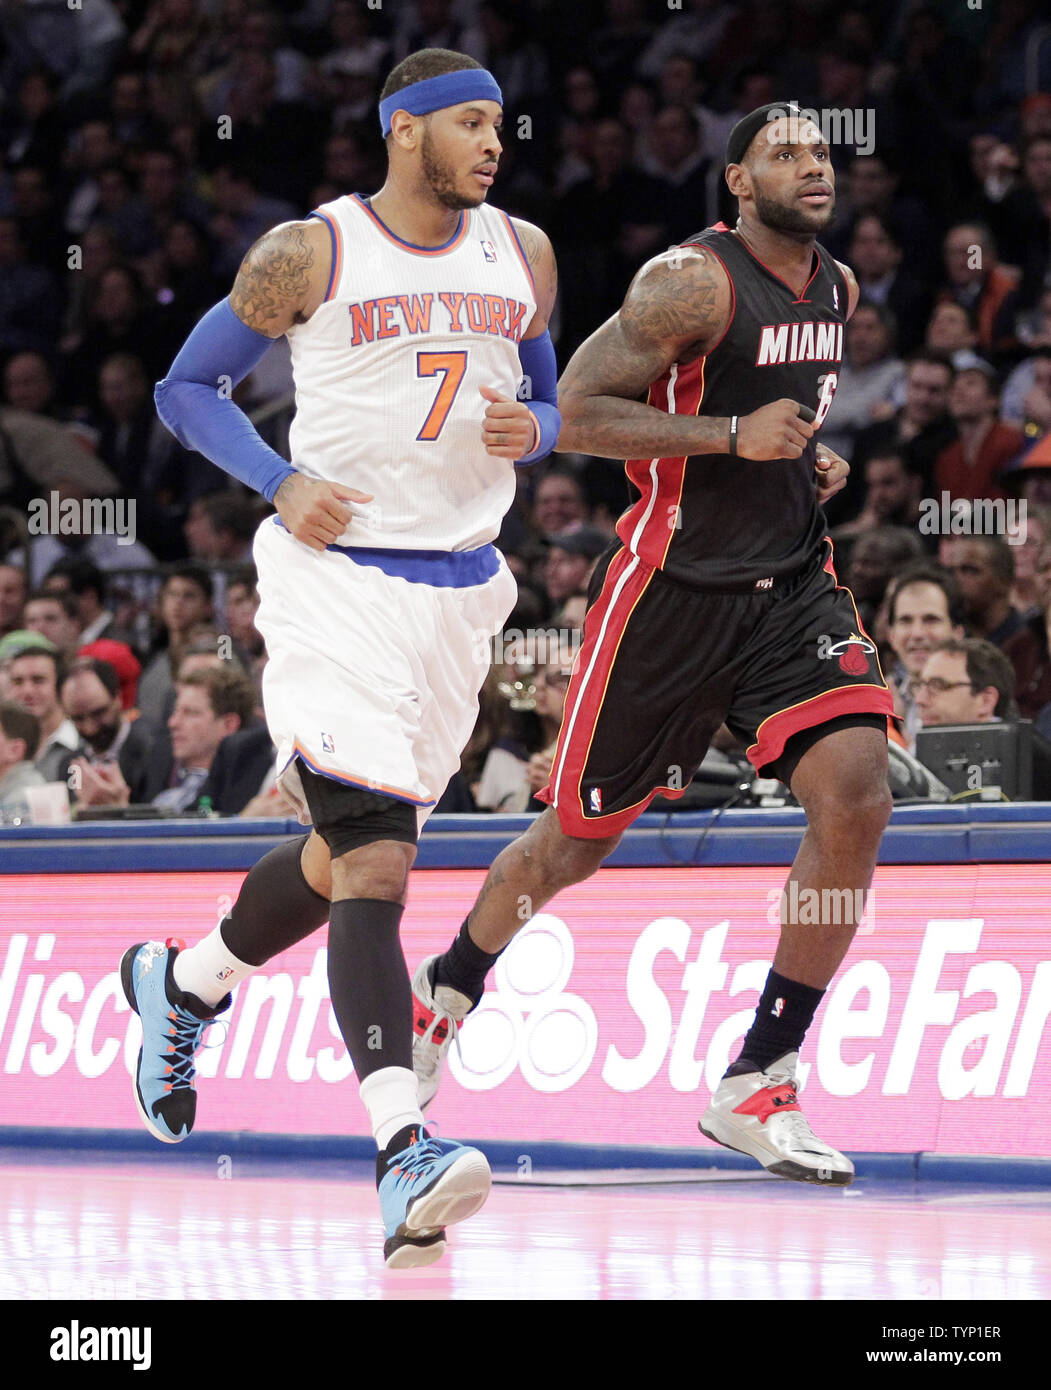 Throwback Thursday: LeBron James and Carmelo Anthony Square off in